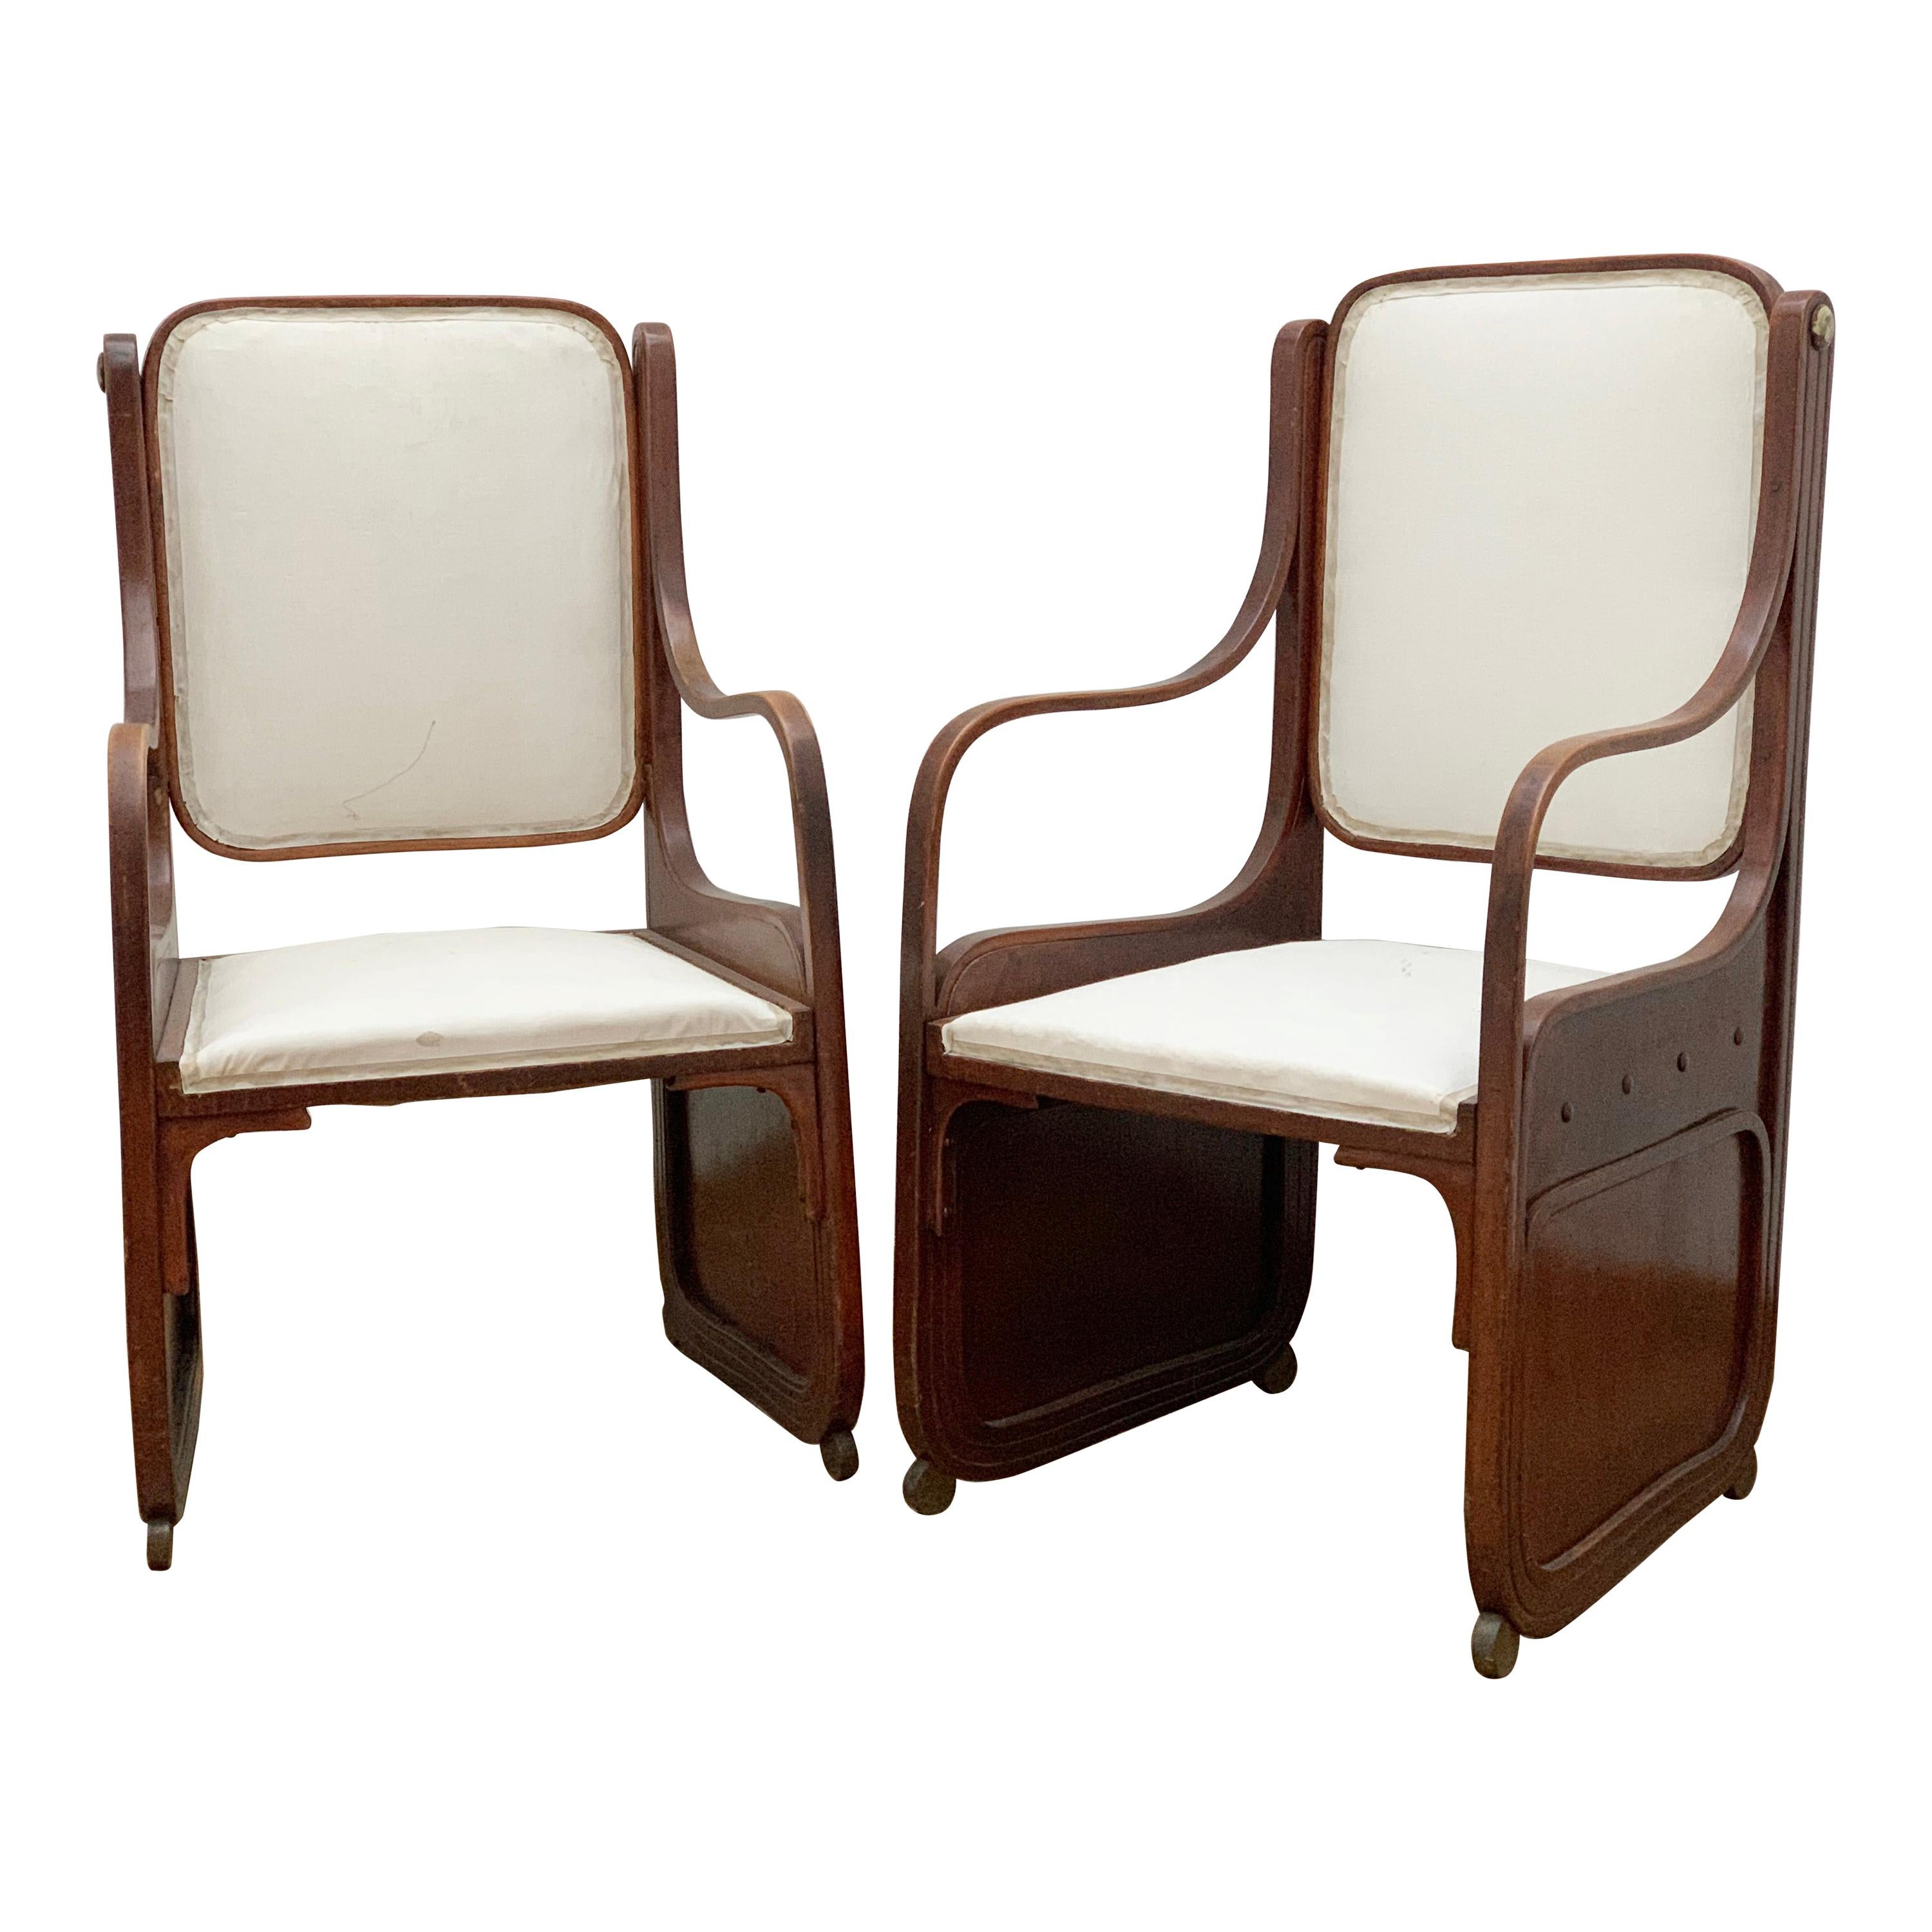 Pair of Bentwood Armchairs by Koloman Moser, Viennese Secession, circa 1900